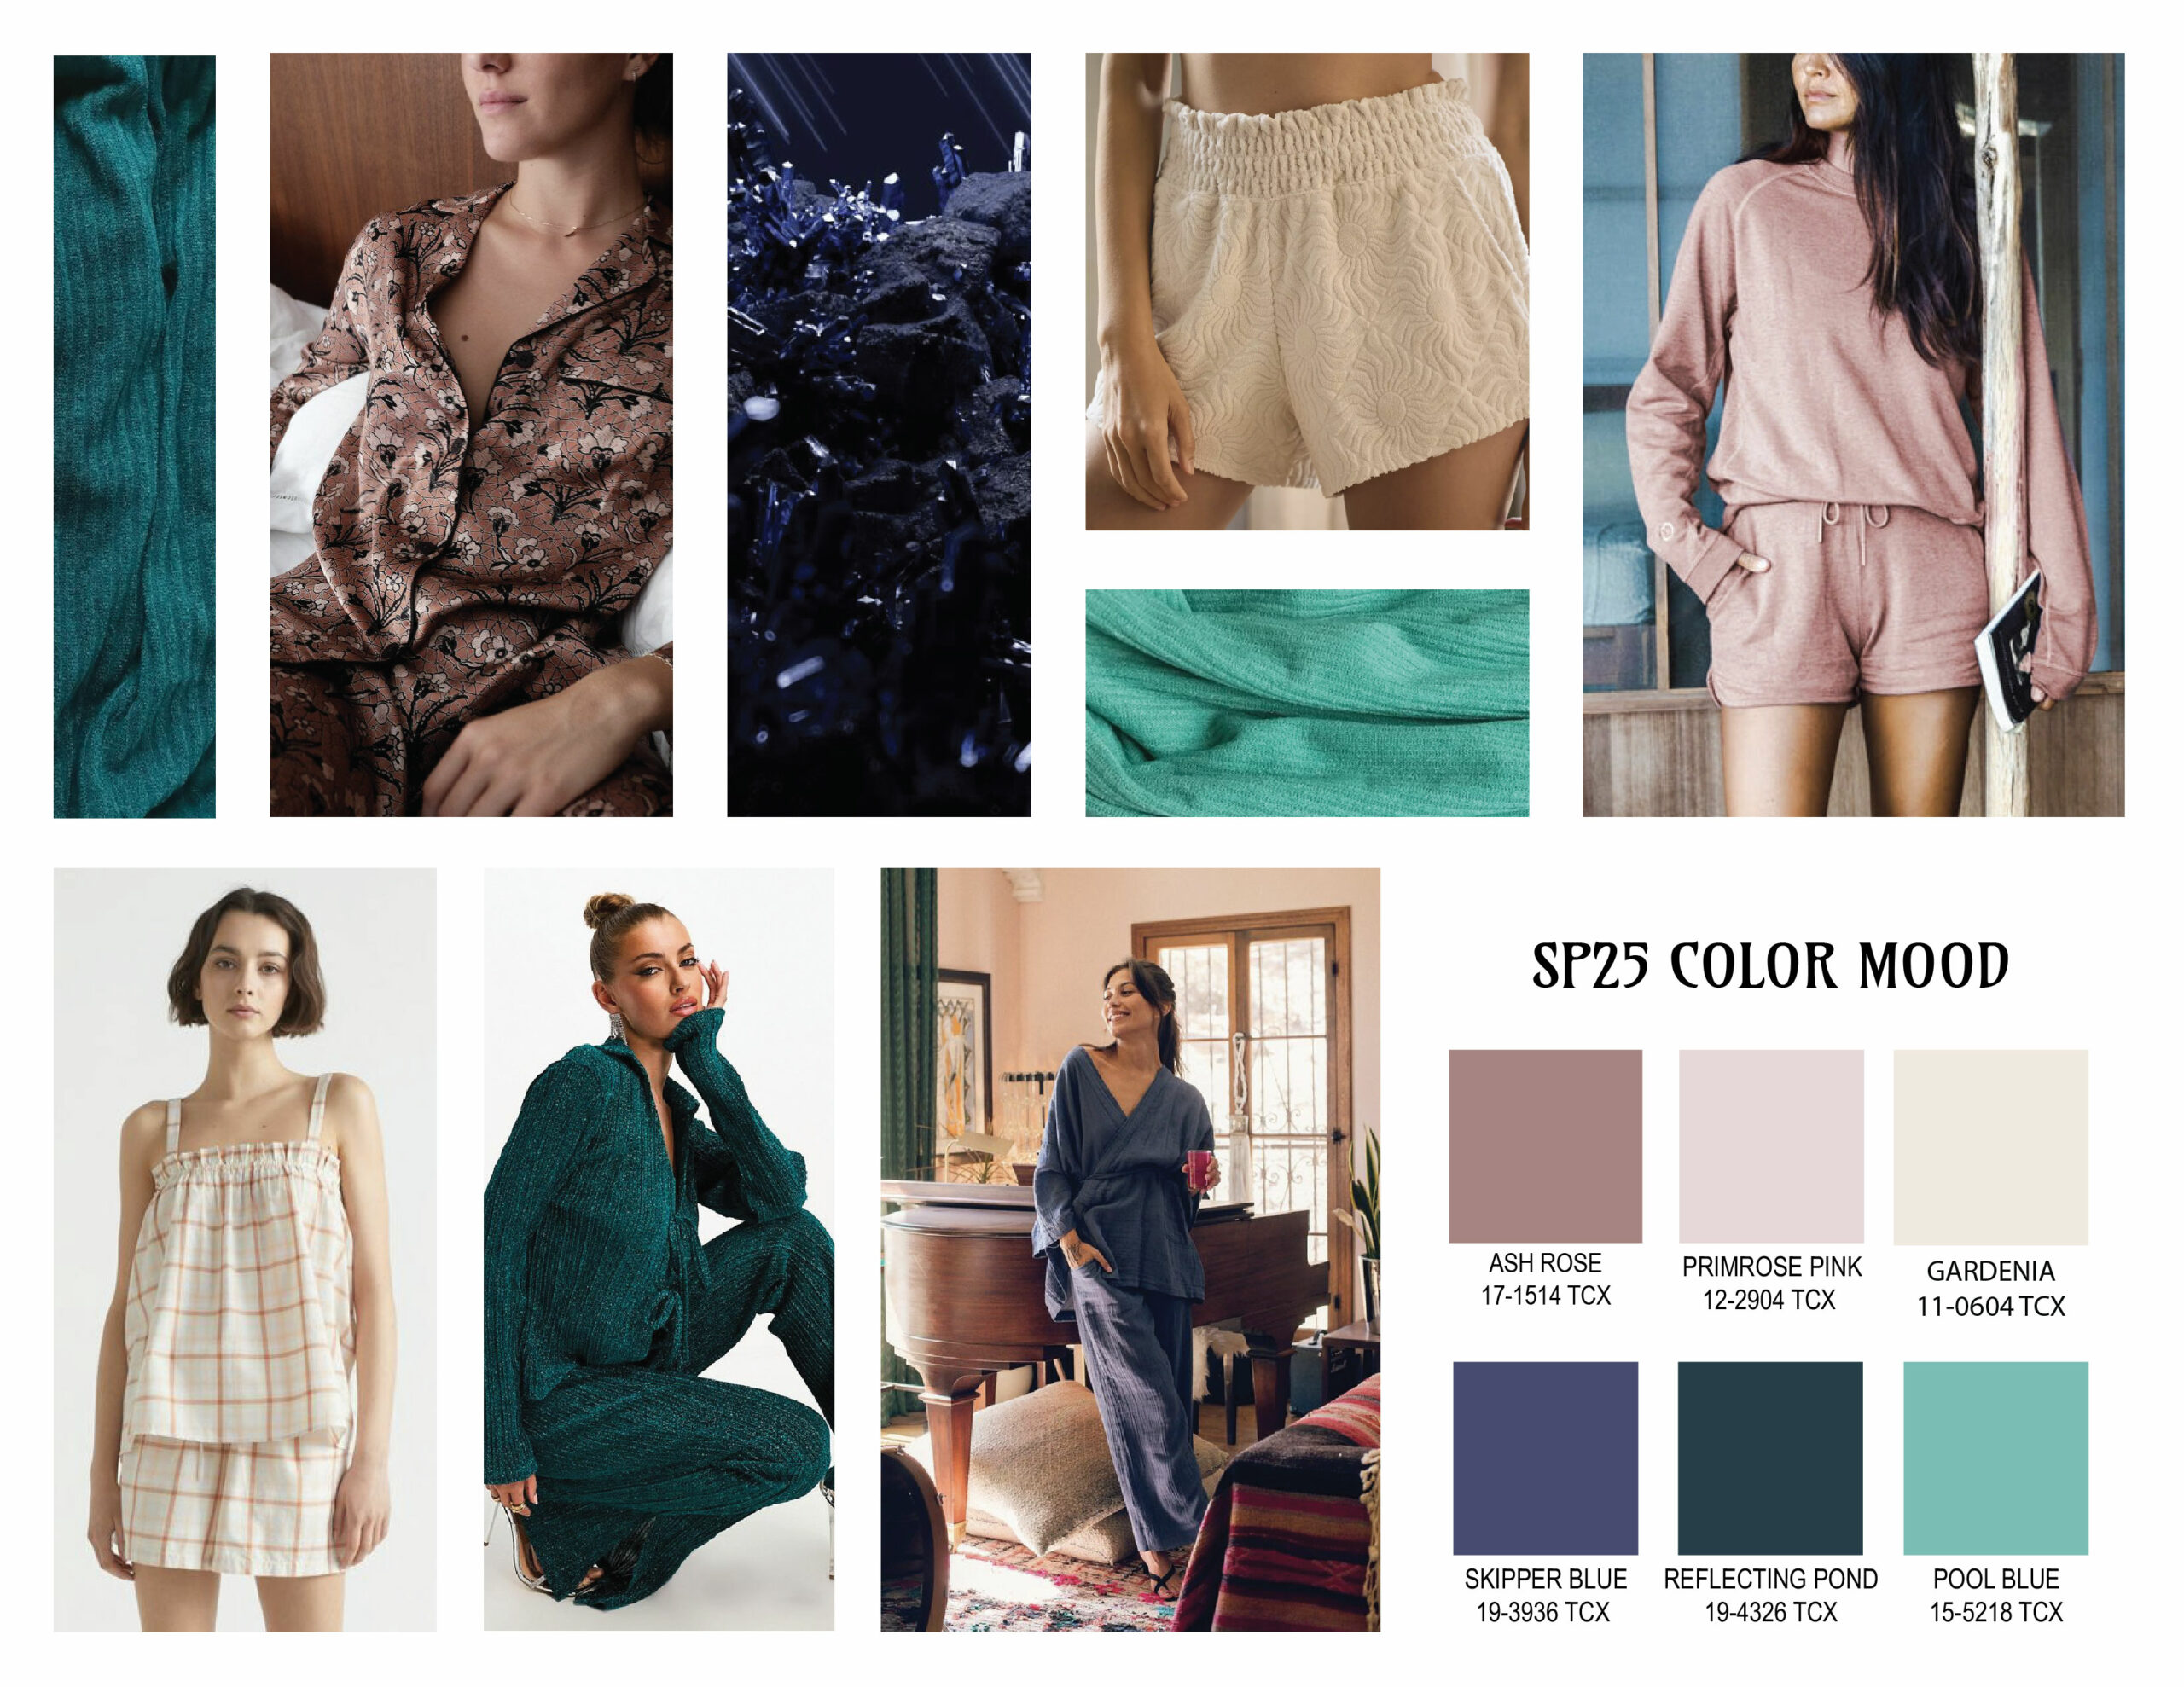 A mood board for SP25 color specific for the loungewear category